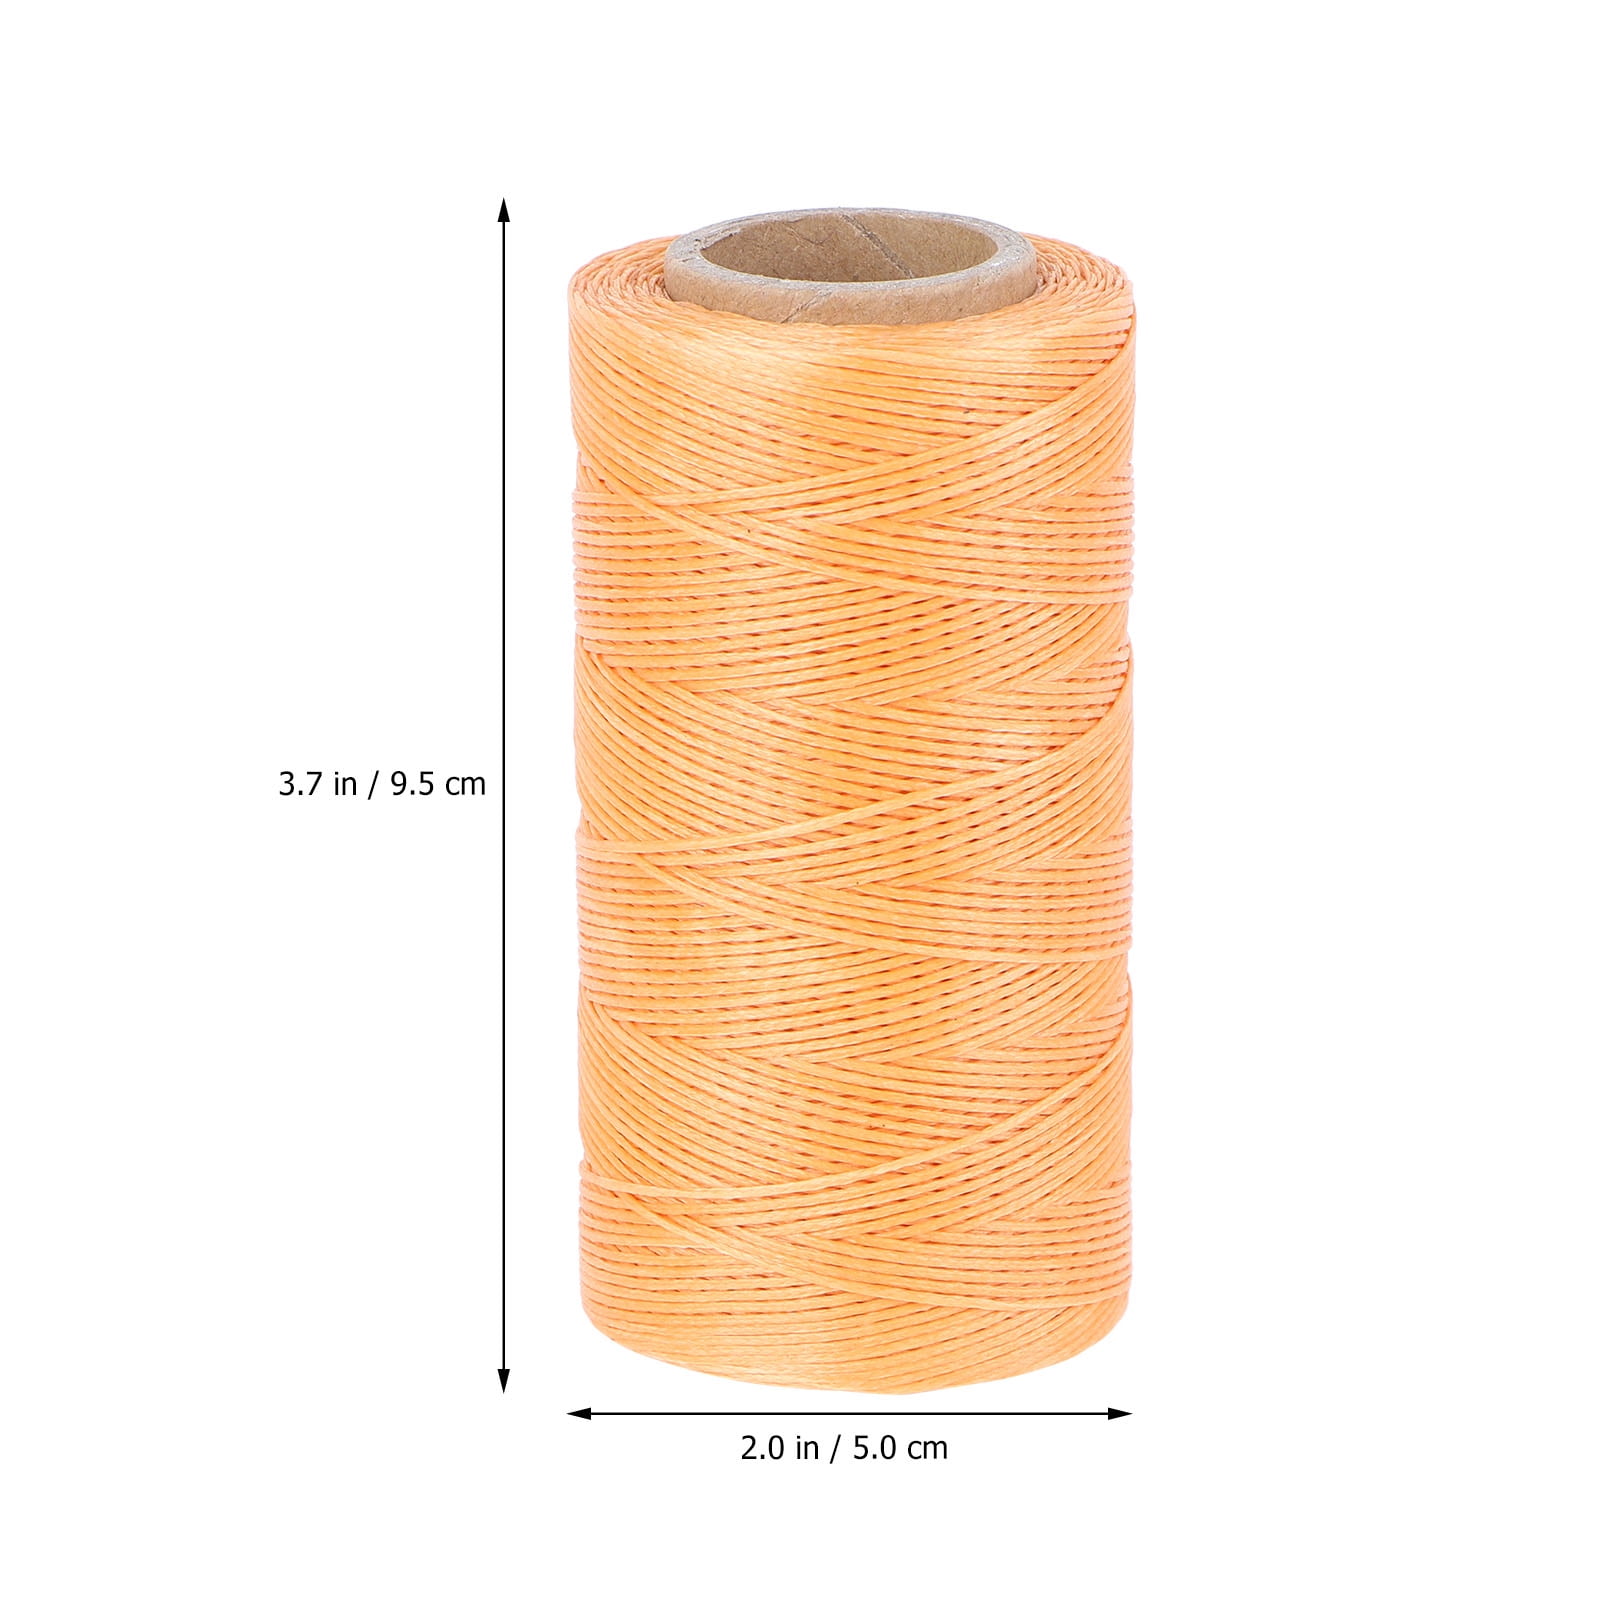 Flat Waxed Thread (Beige) - 284Yard 1mm 150D Wax String Cord Sewing Craft Tool Portable for DIY Handicraft Leather Products Beading Hand Stitching